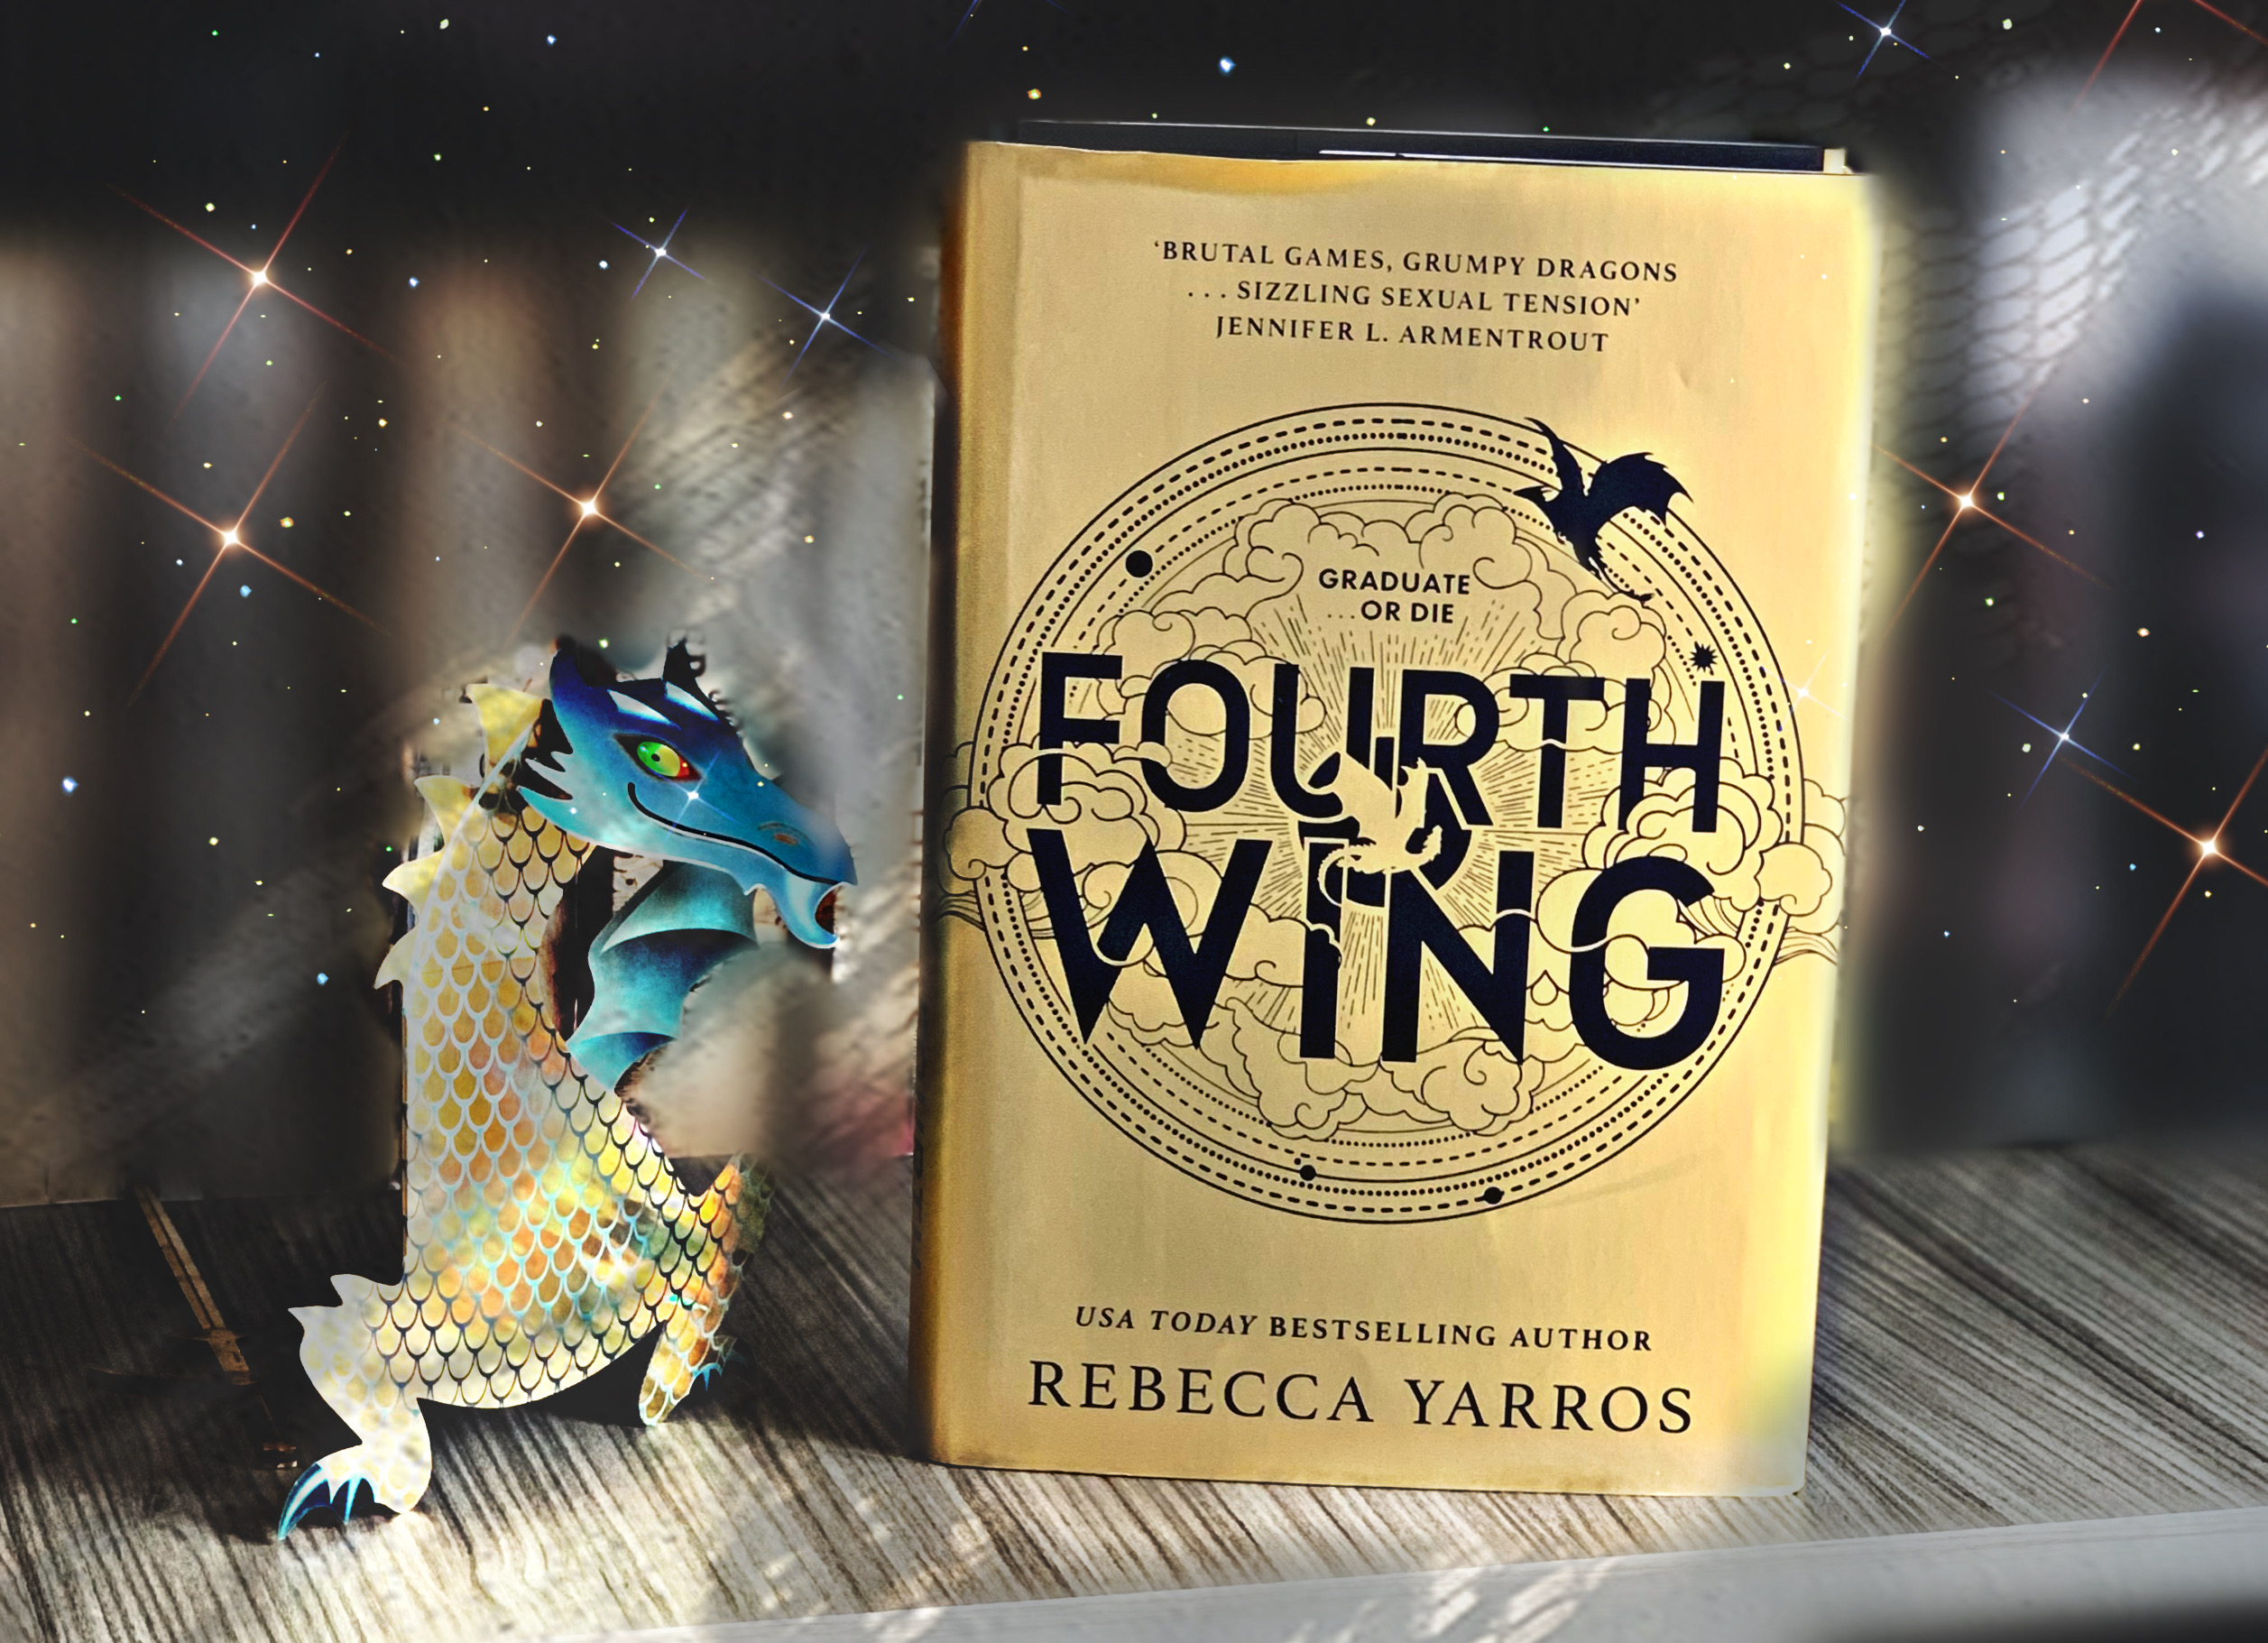 book review of fourth wing